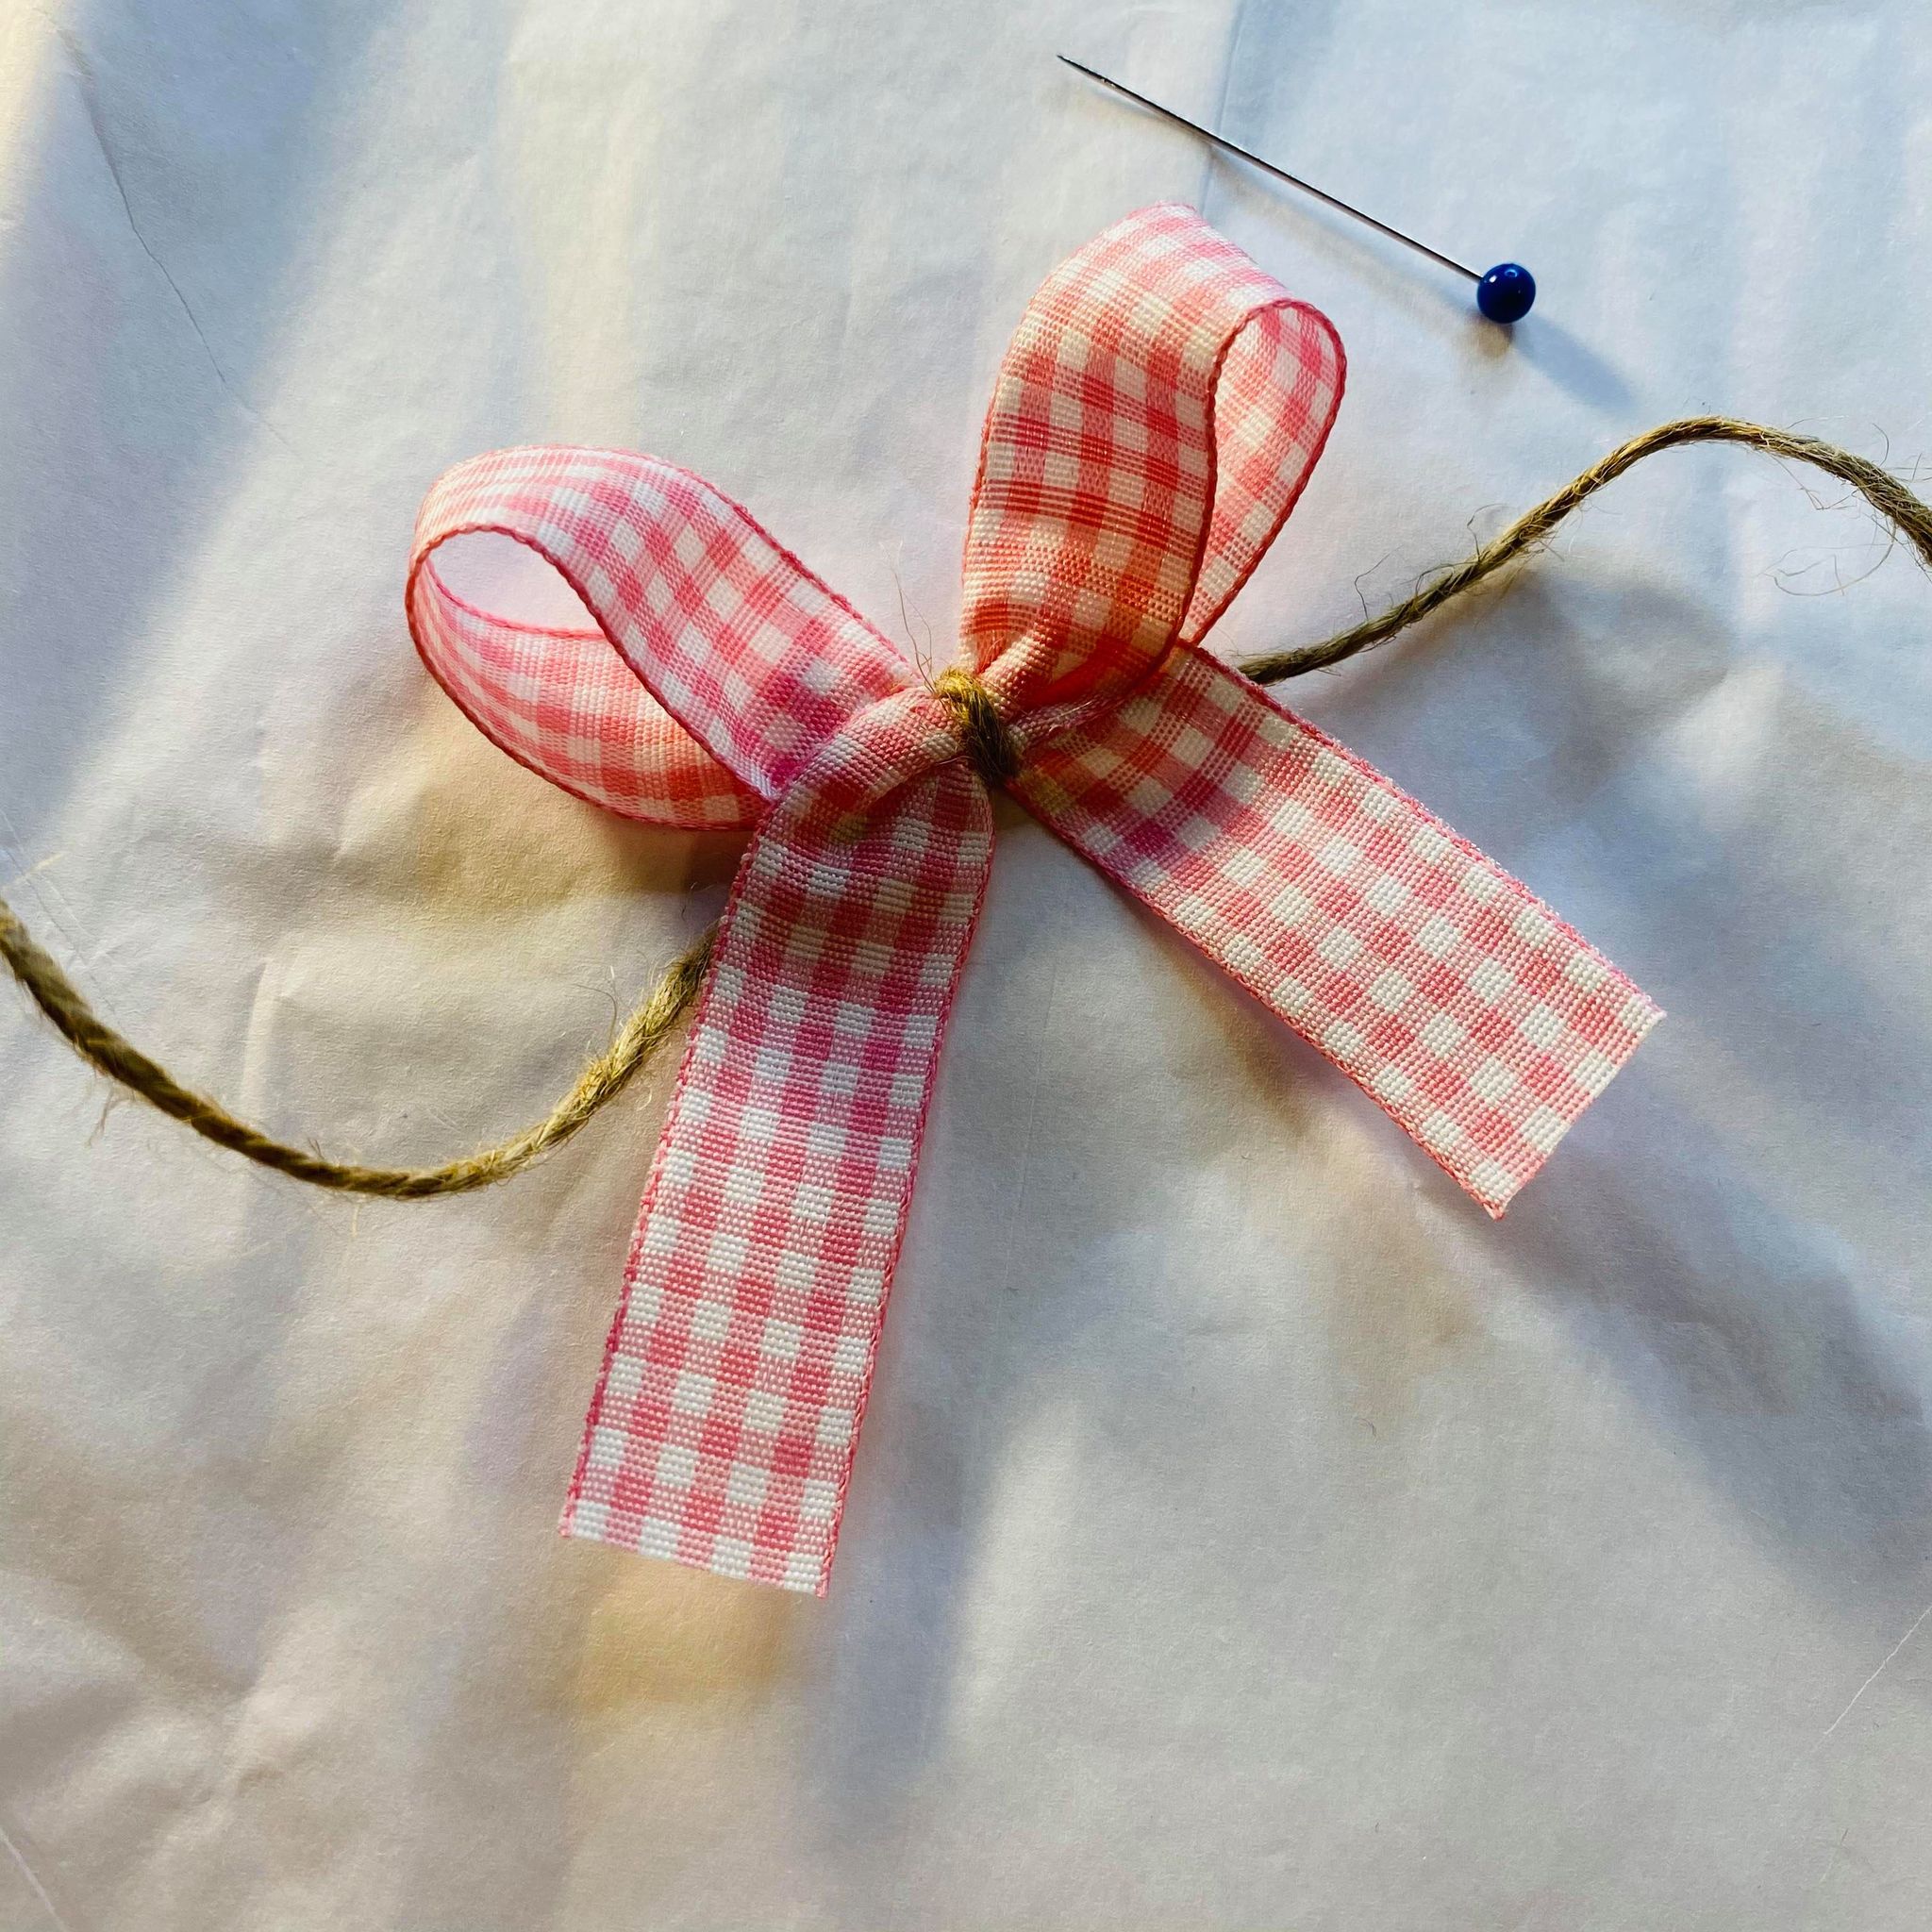 How to Tie a Gift Bow: Easy Steps to Tie a Bow